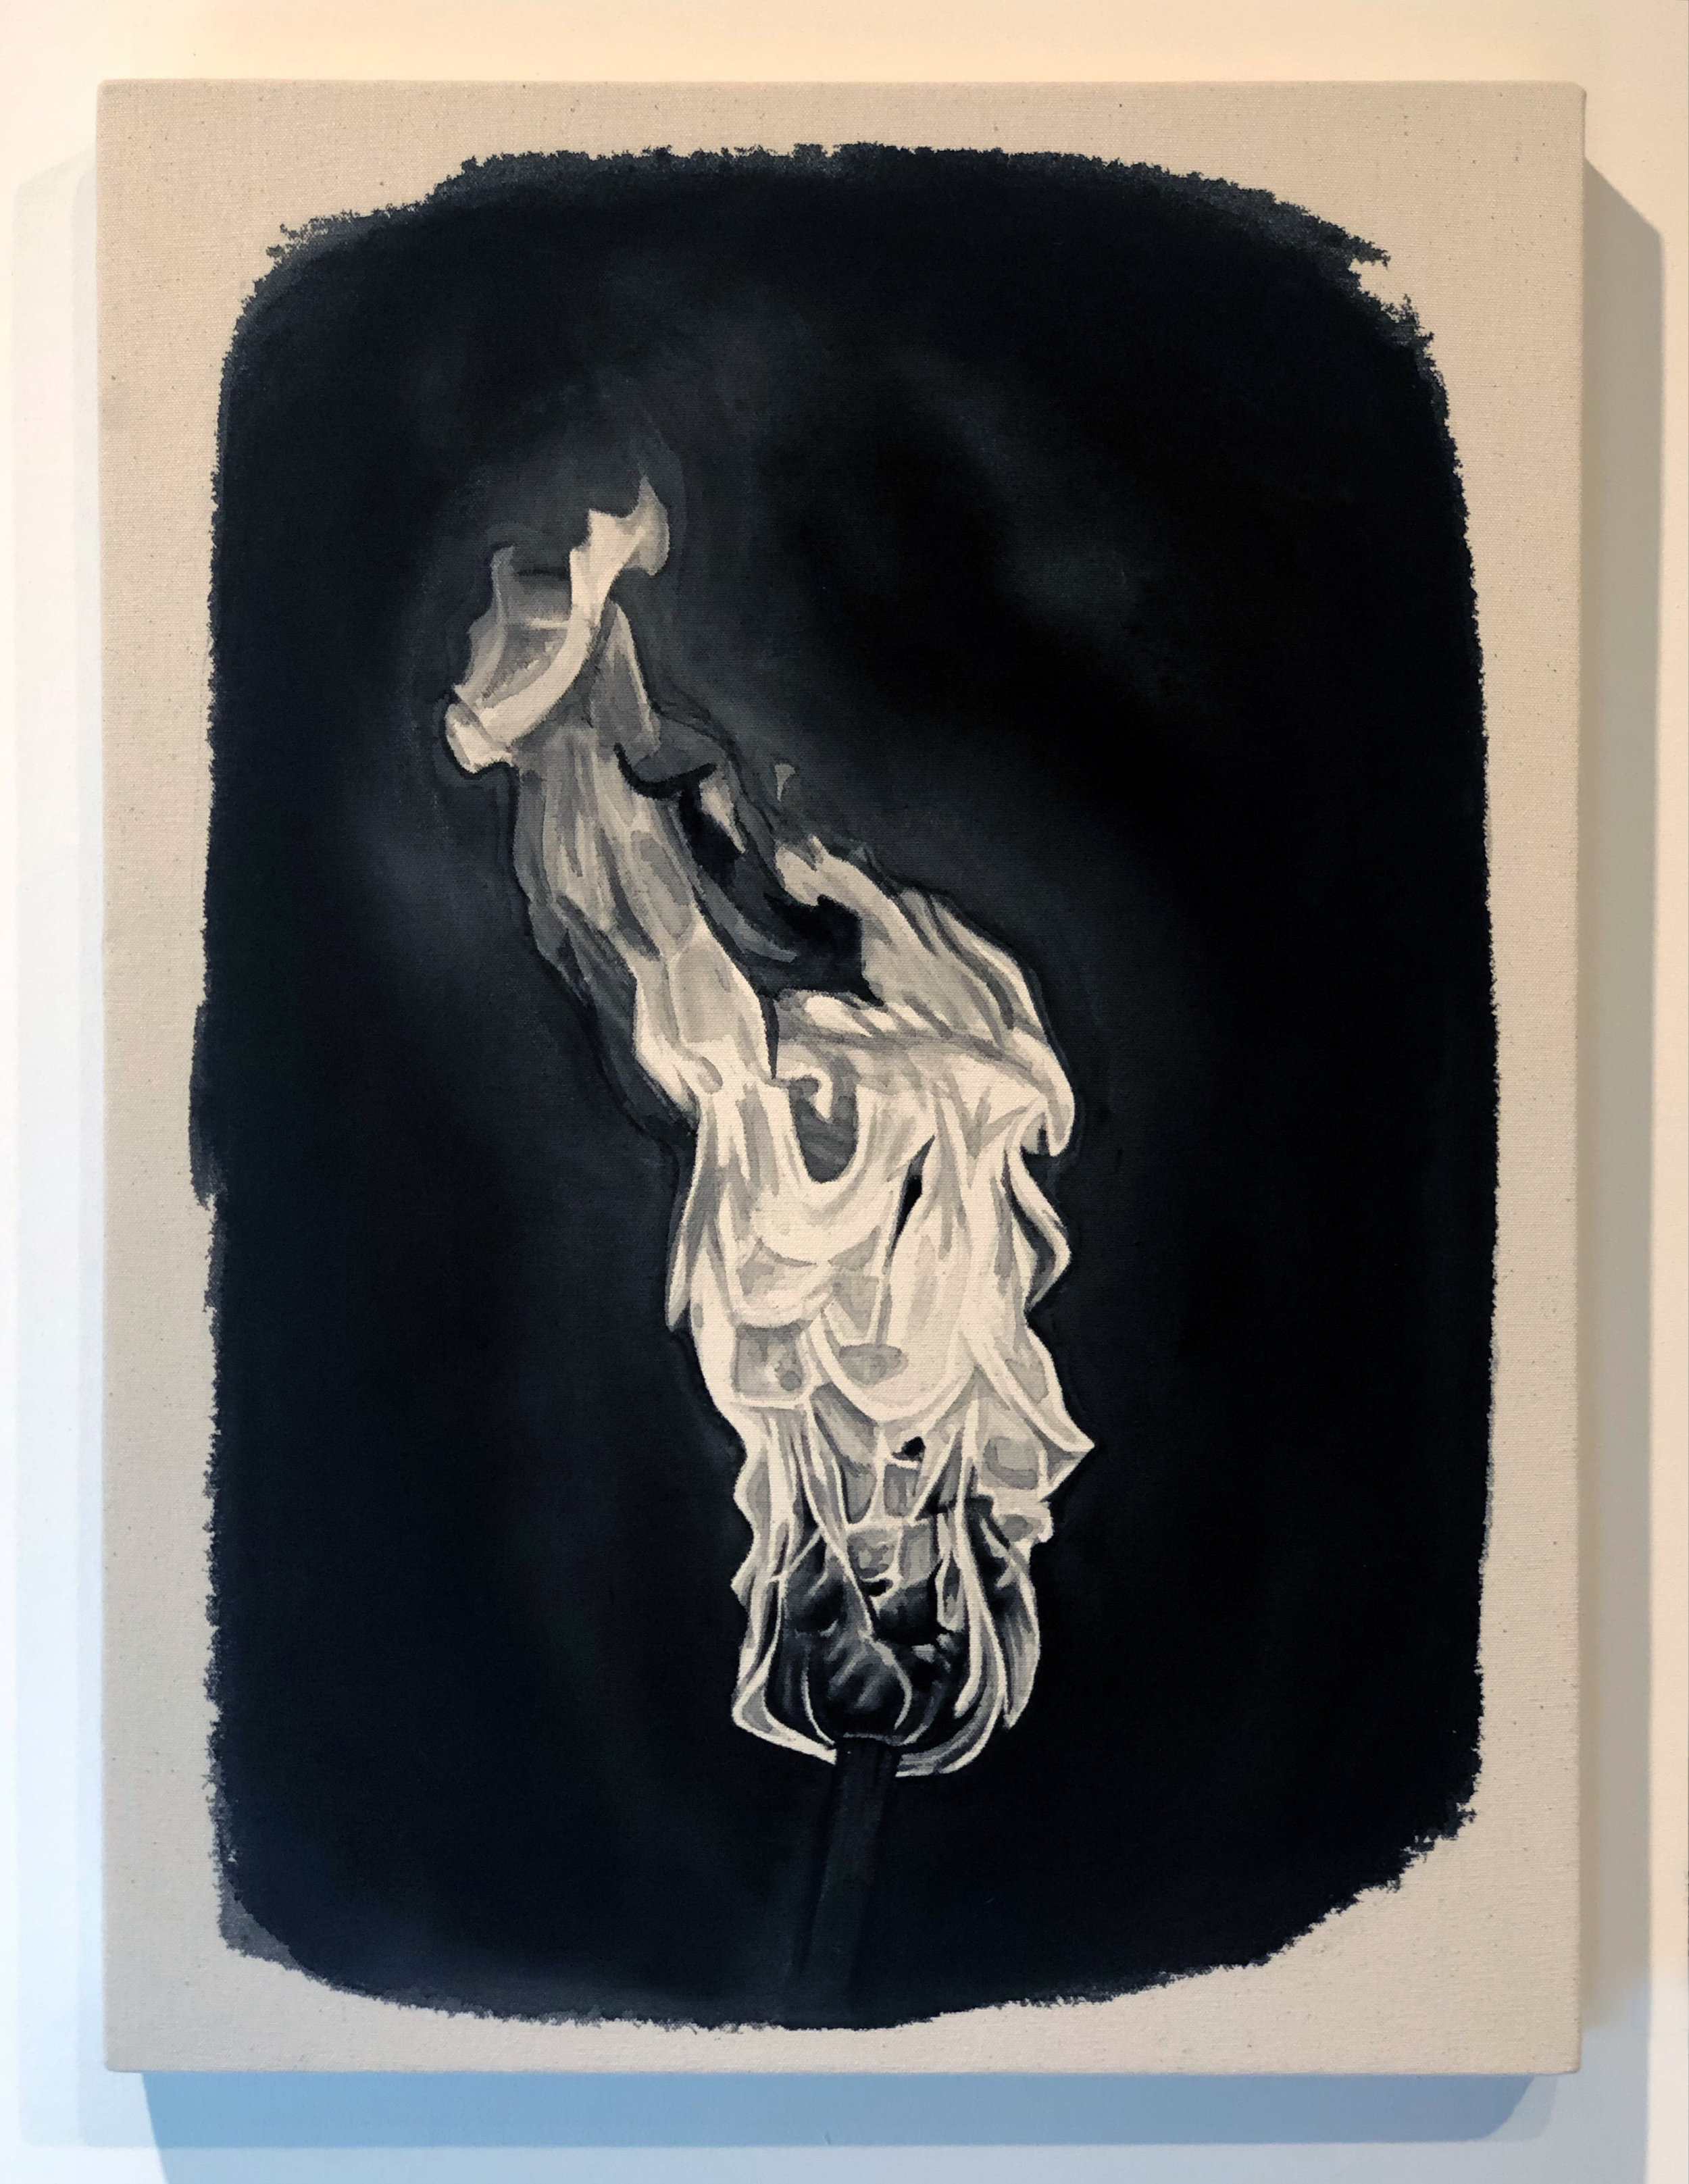   Torch,  2019 Black gesso on canvas 23.75 x 17.75 inches (60.3cm x 45cm) 